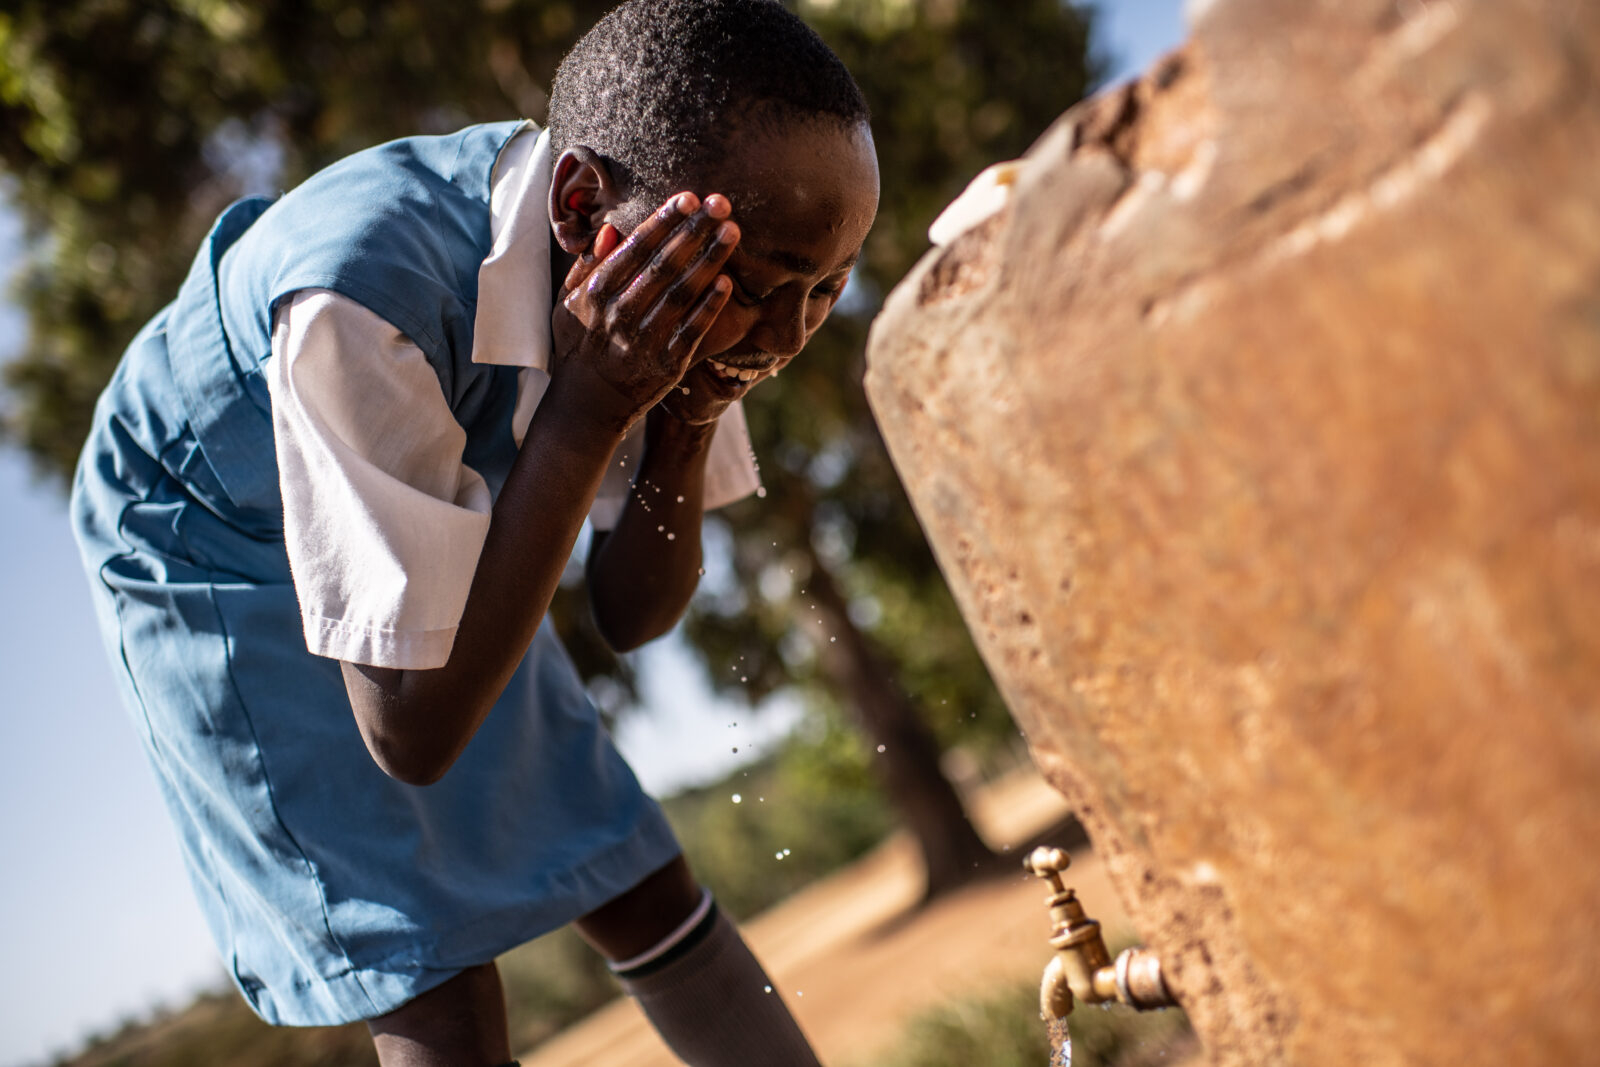 A young girl wearing a blue school uniform smiles while washing her face.